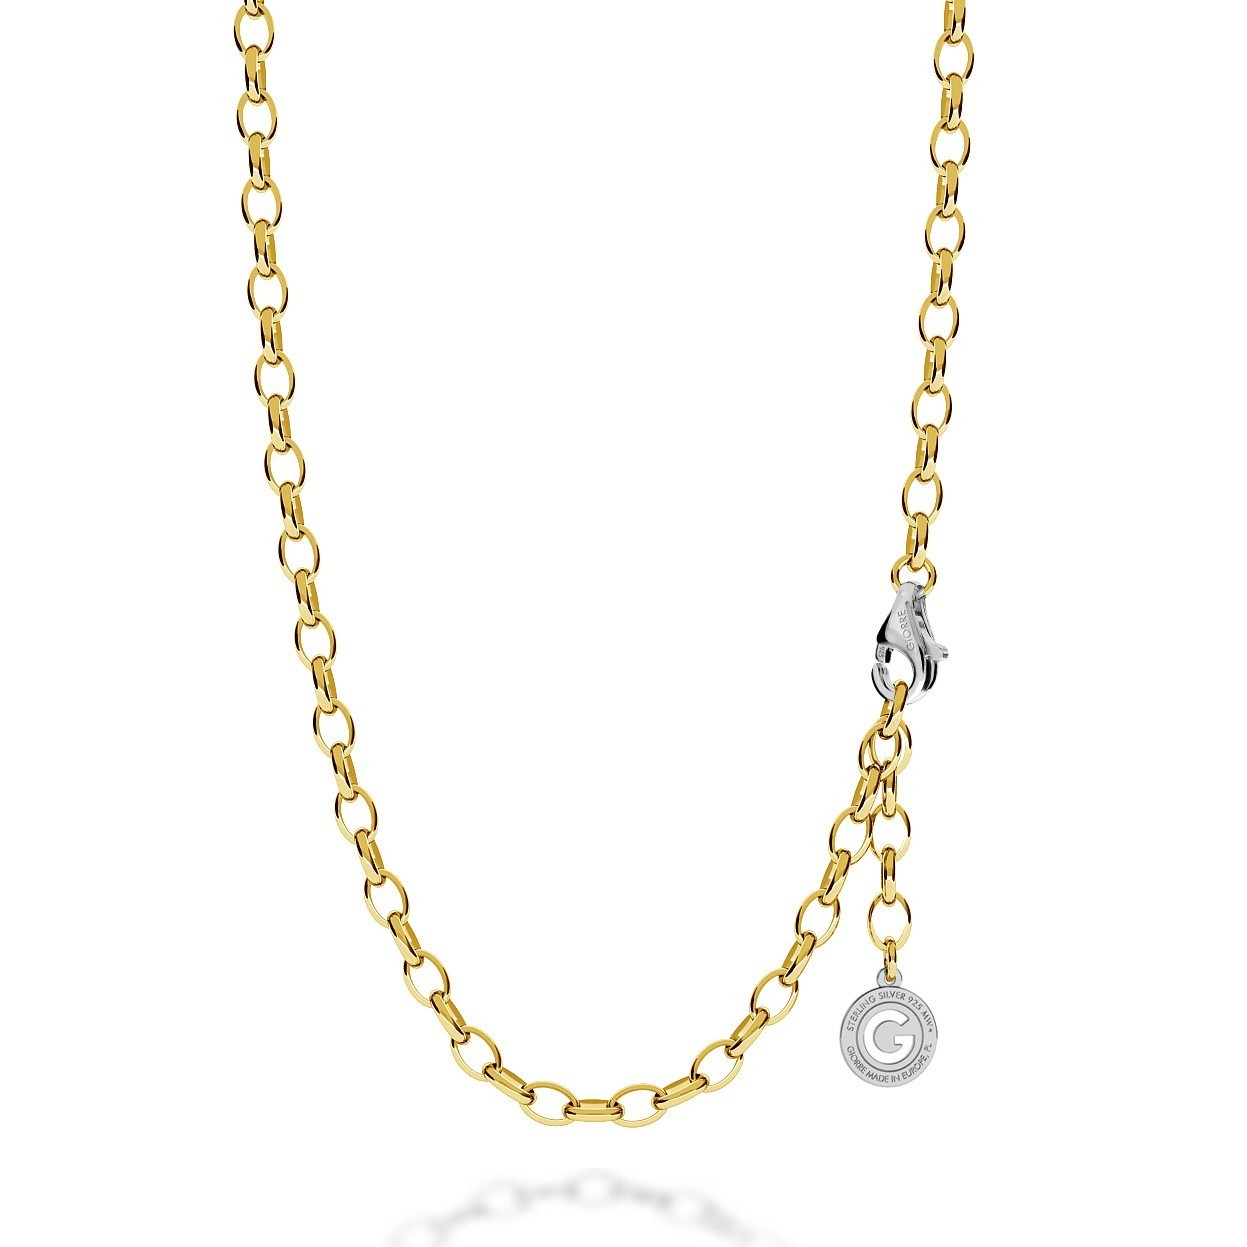 Sterling silver necklace 55-65 cm light rhodium, yellow gold clasp, link 7x5 mm